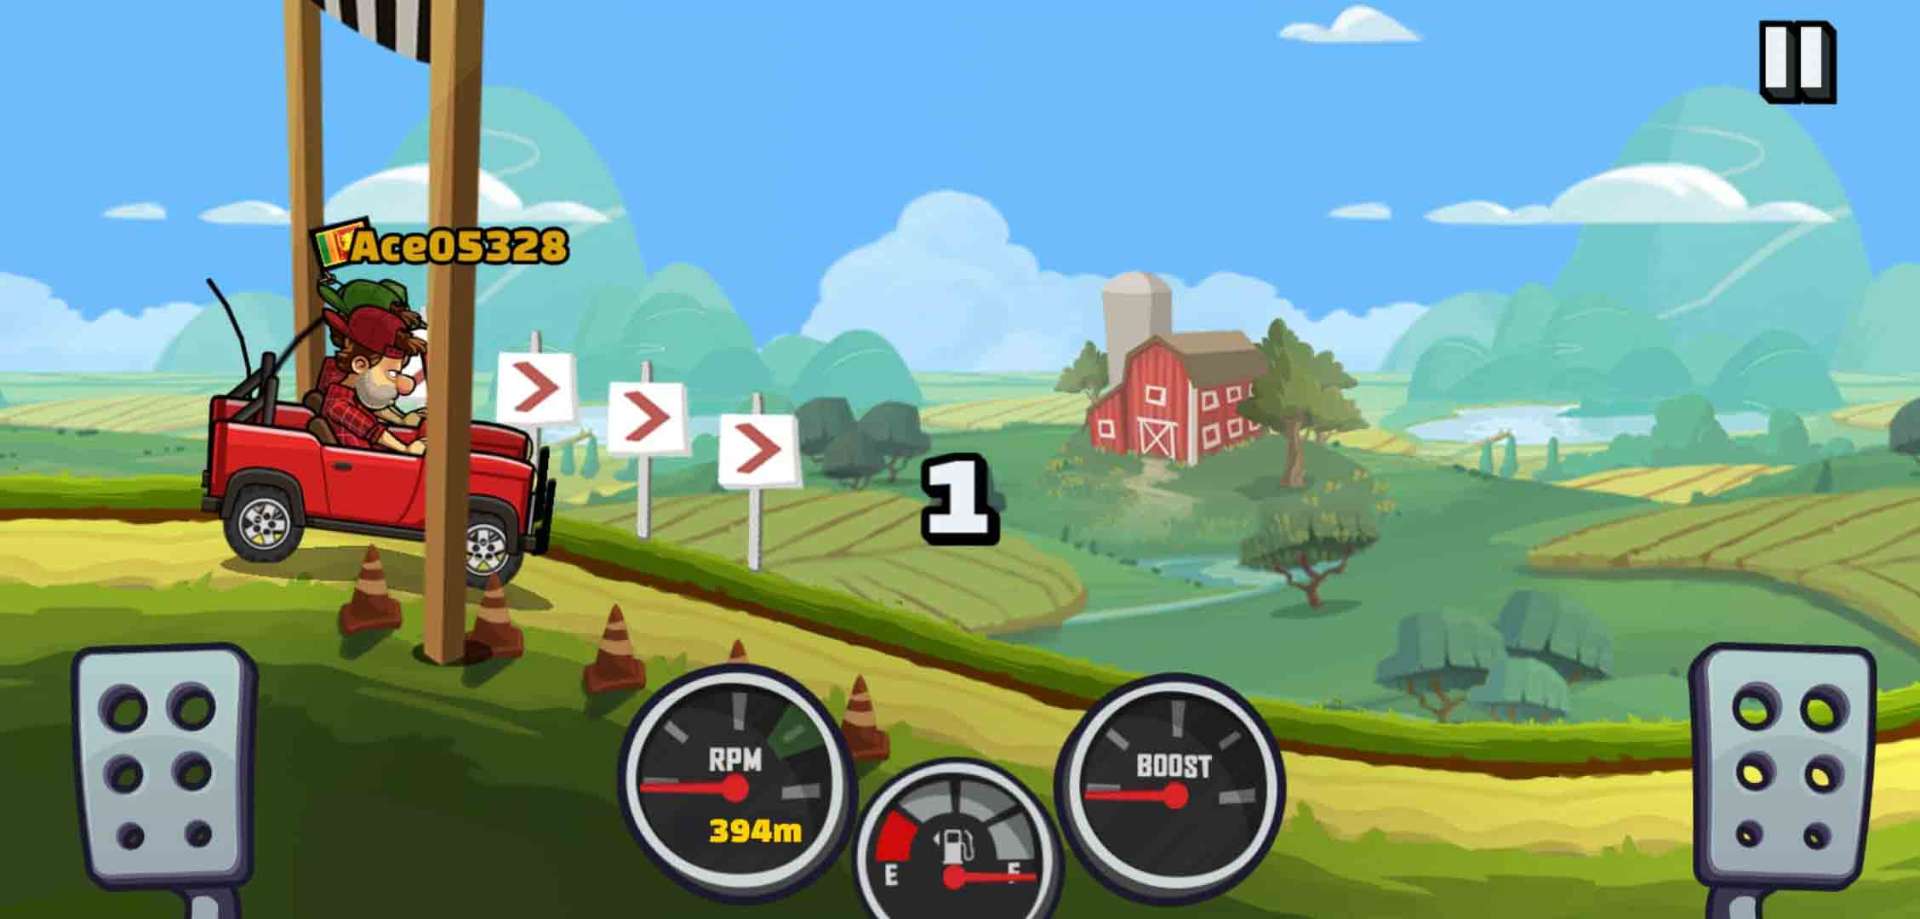 See How To Get Diamonds On Hill Climb Racing 2